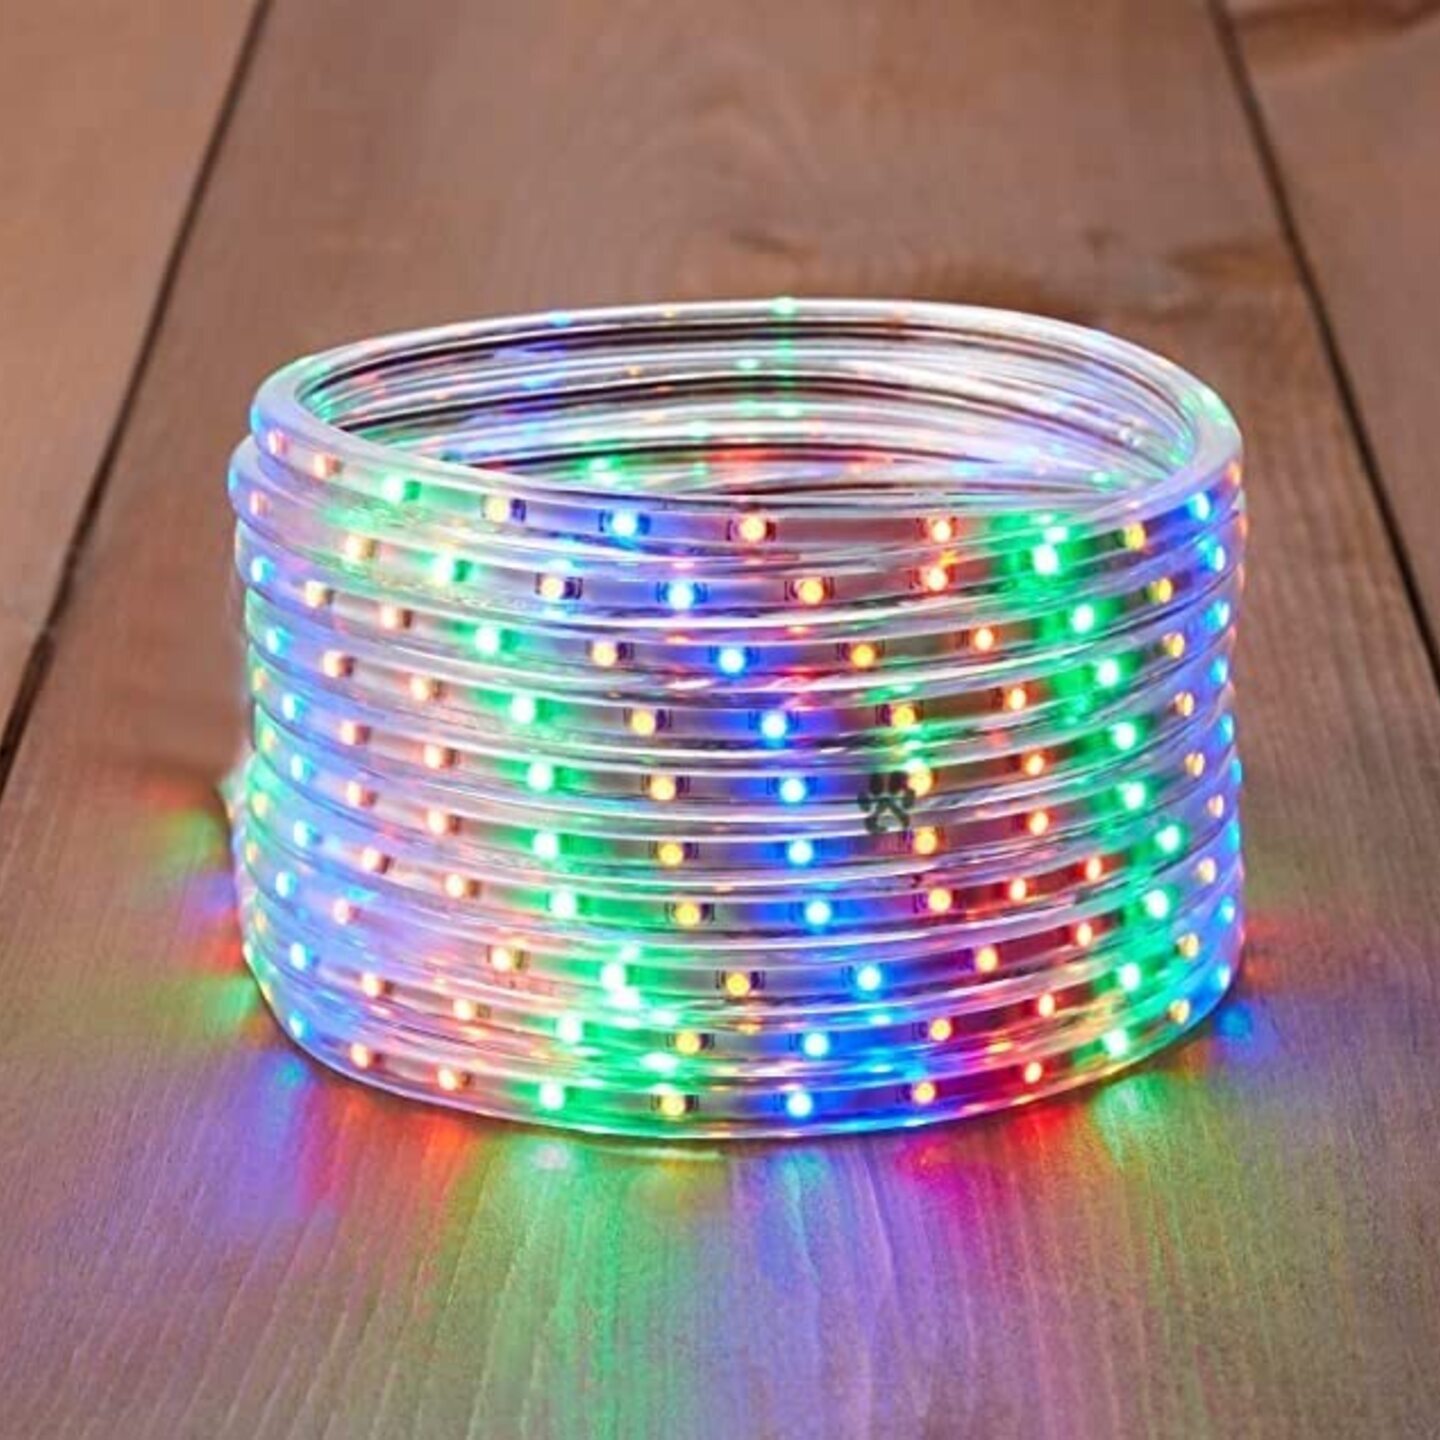 15 Meter Waterproof RGB LED Rope Light with Mode Change Controller Included BIS Certified IP65 rated